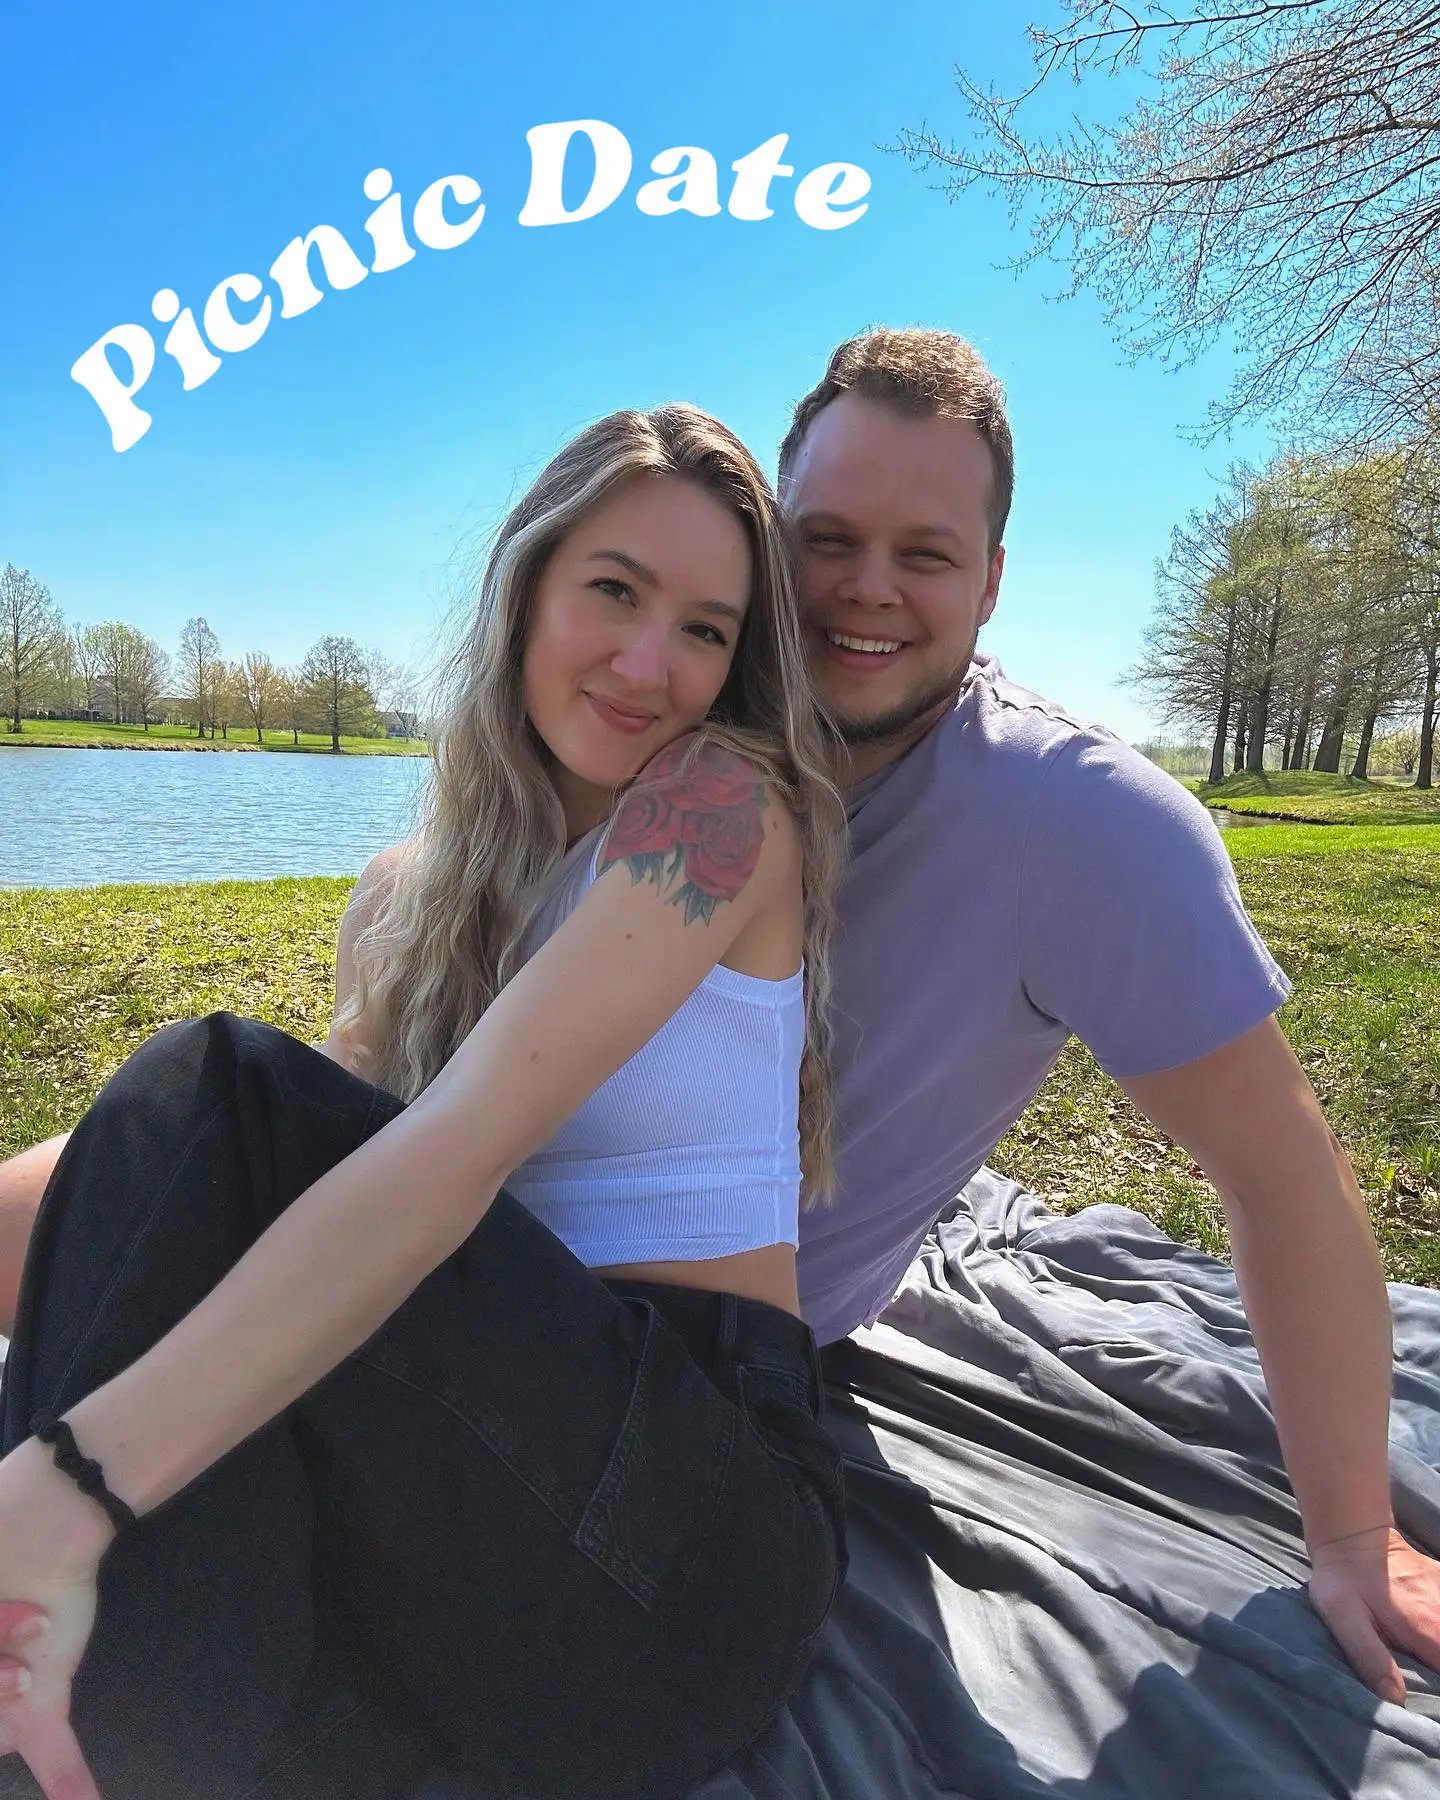 Picnic Date ? | Gallery posted by Meaghan Ranee | Lemon8